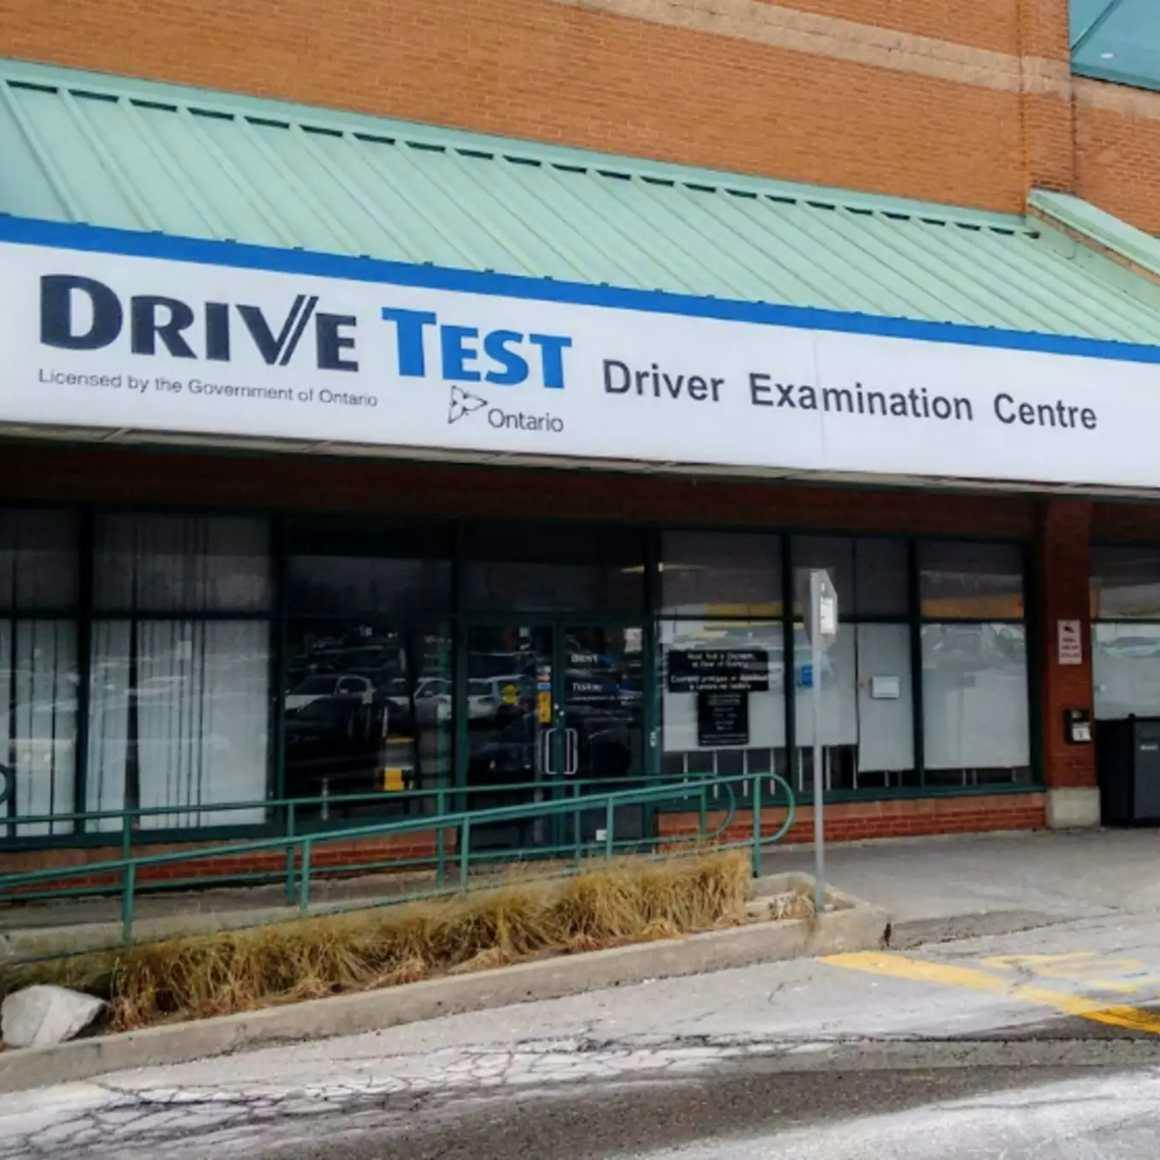 Ontario Driver Examination Services – 2nd Generation image